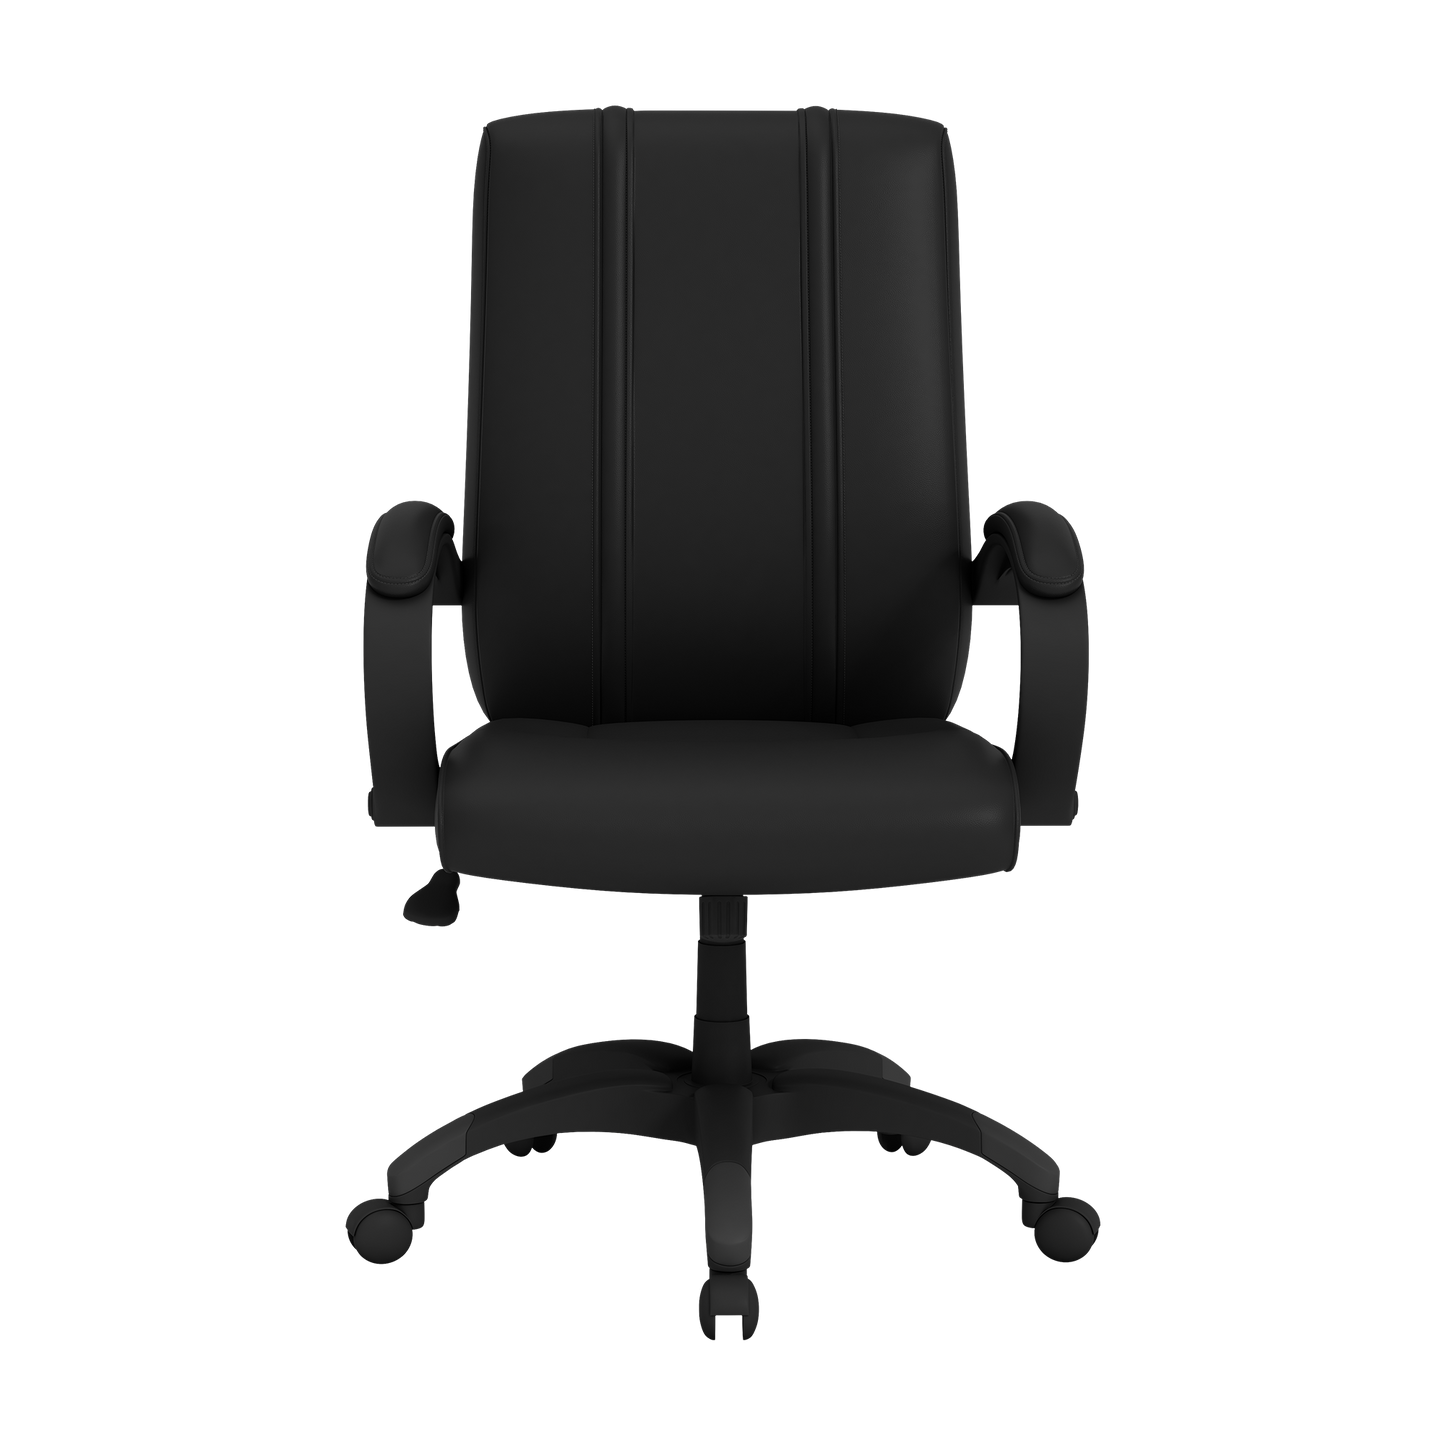 Office Chair 1000 with  New York Jets Helmet Logo